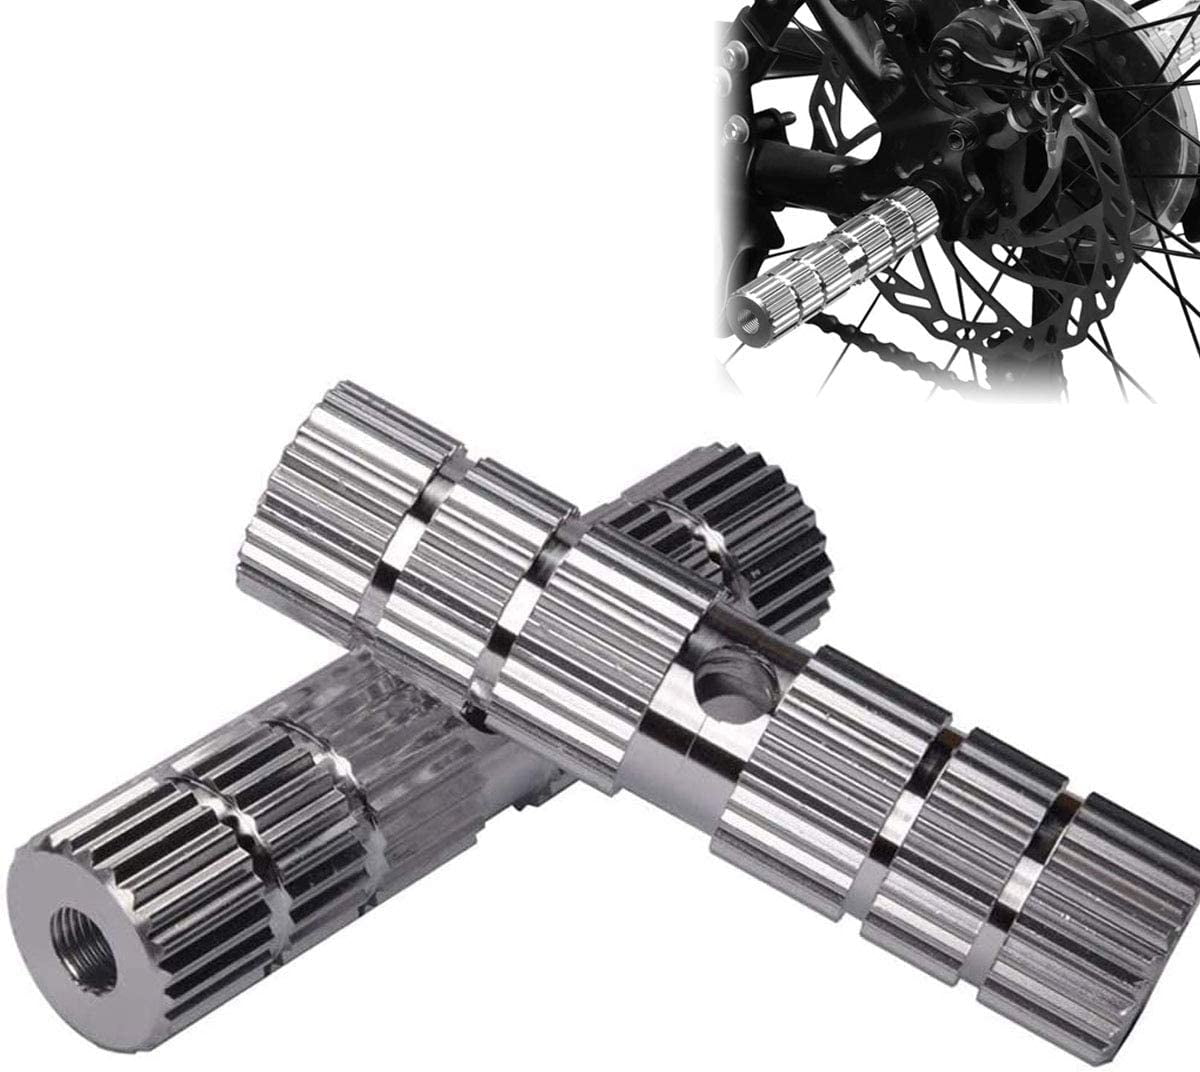 Transer Antislip Cylinder Mountain Standing Axle Foot Peg for BMX Bikes Bicycles 1 Pair Aluminum Alloy Foot Pegs 